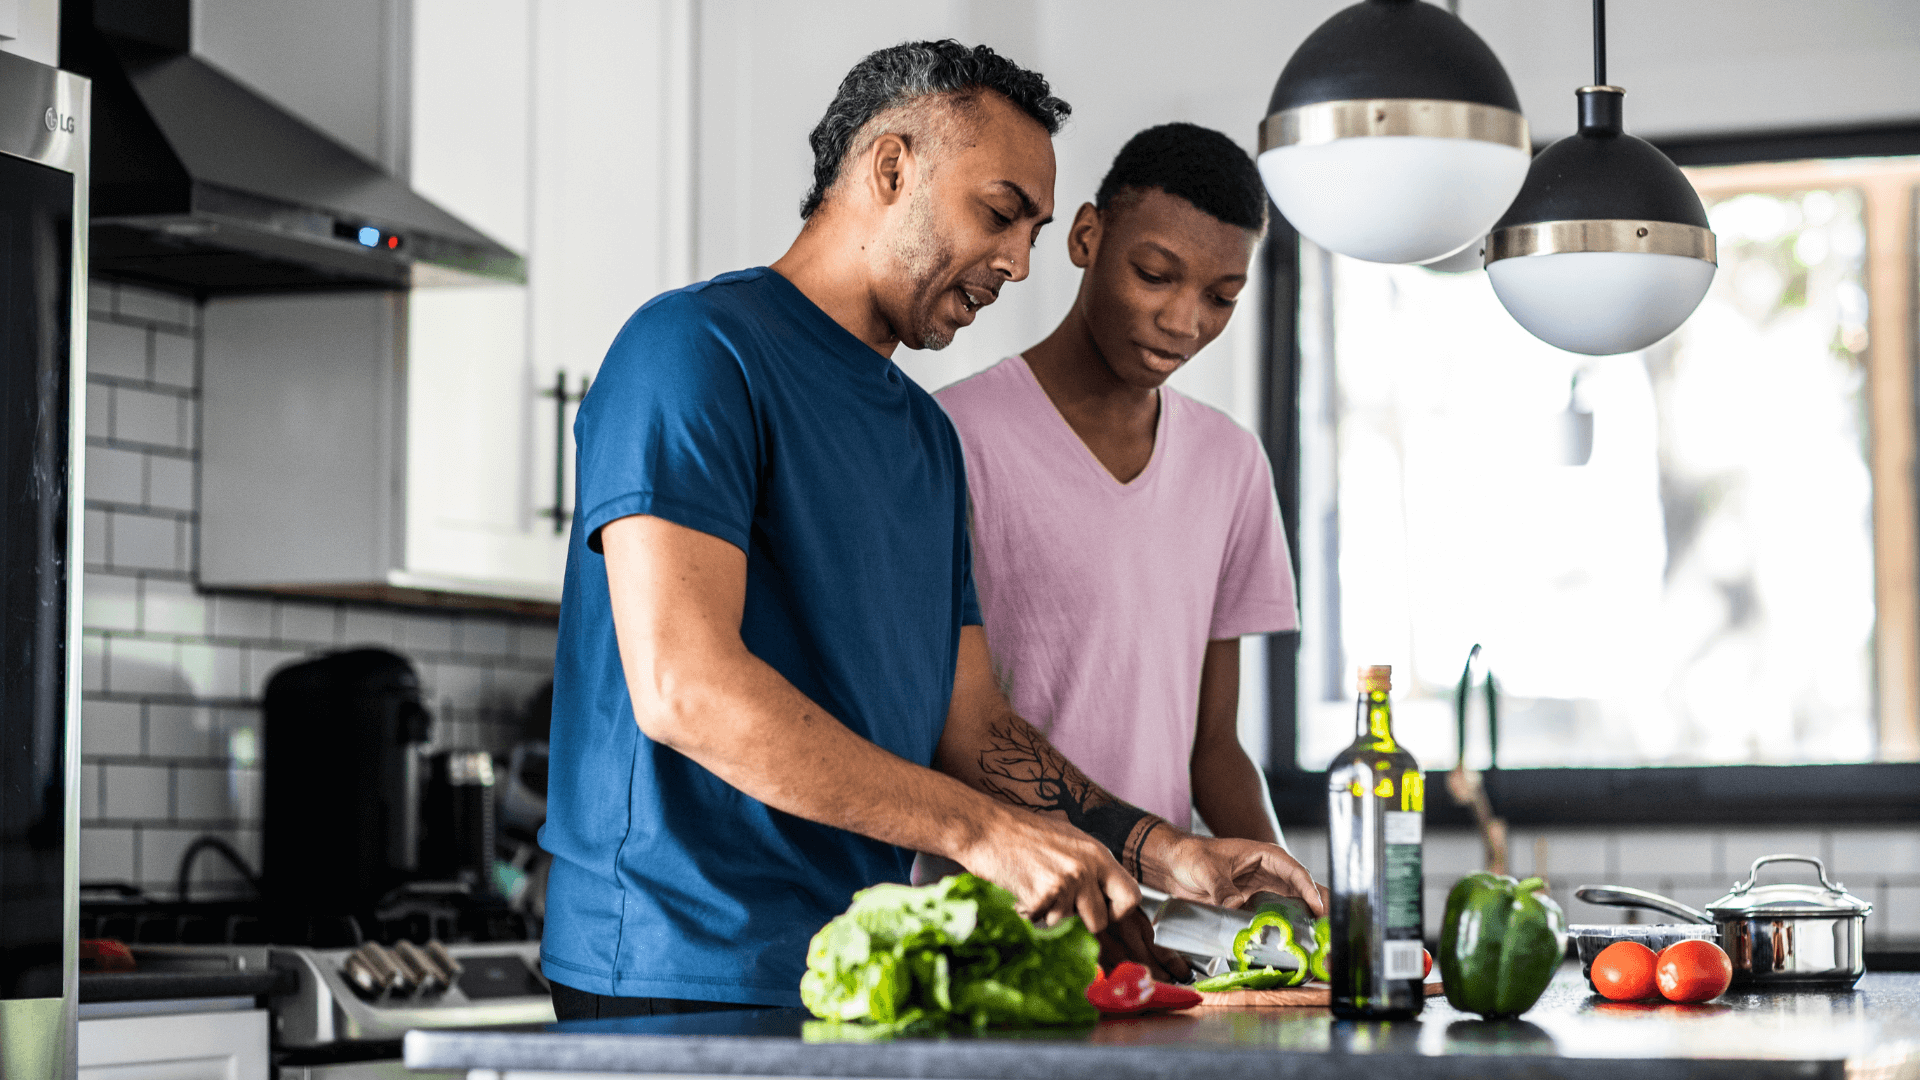 Father and teenage son prepare food in kitchen. Father chops vegetables as son observes.